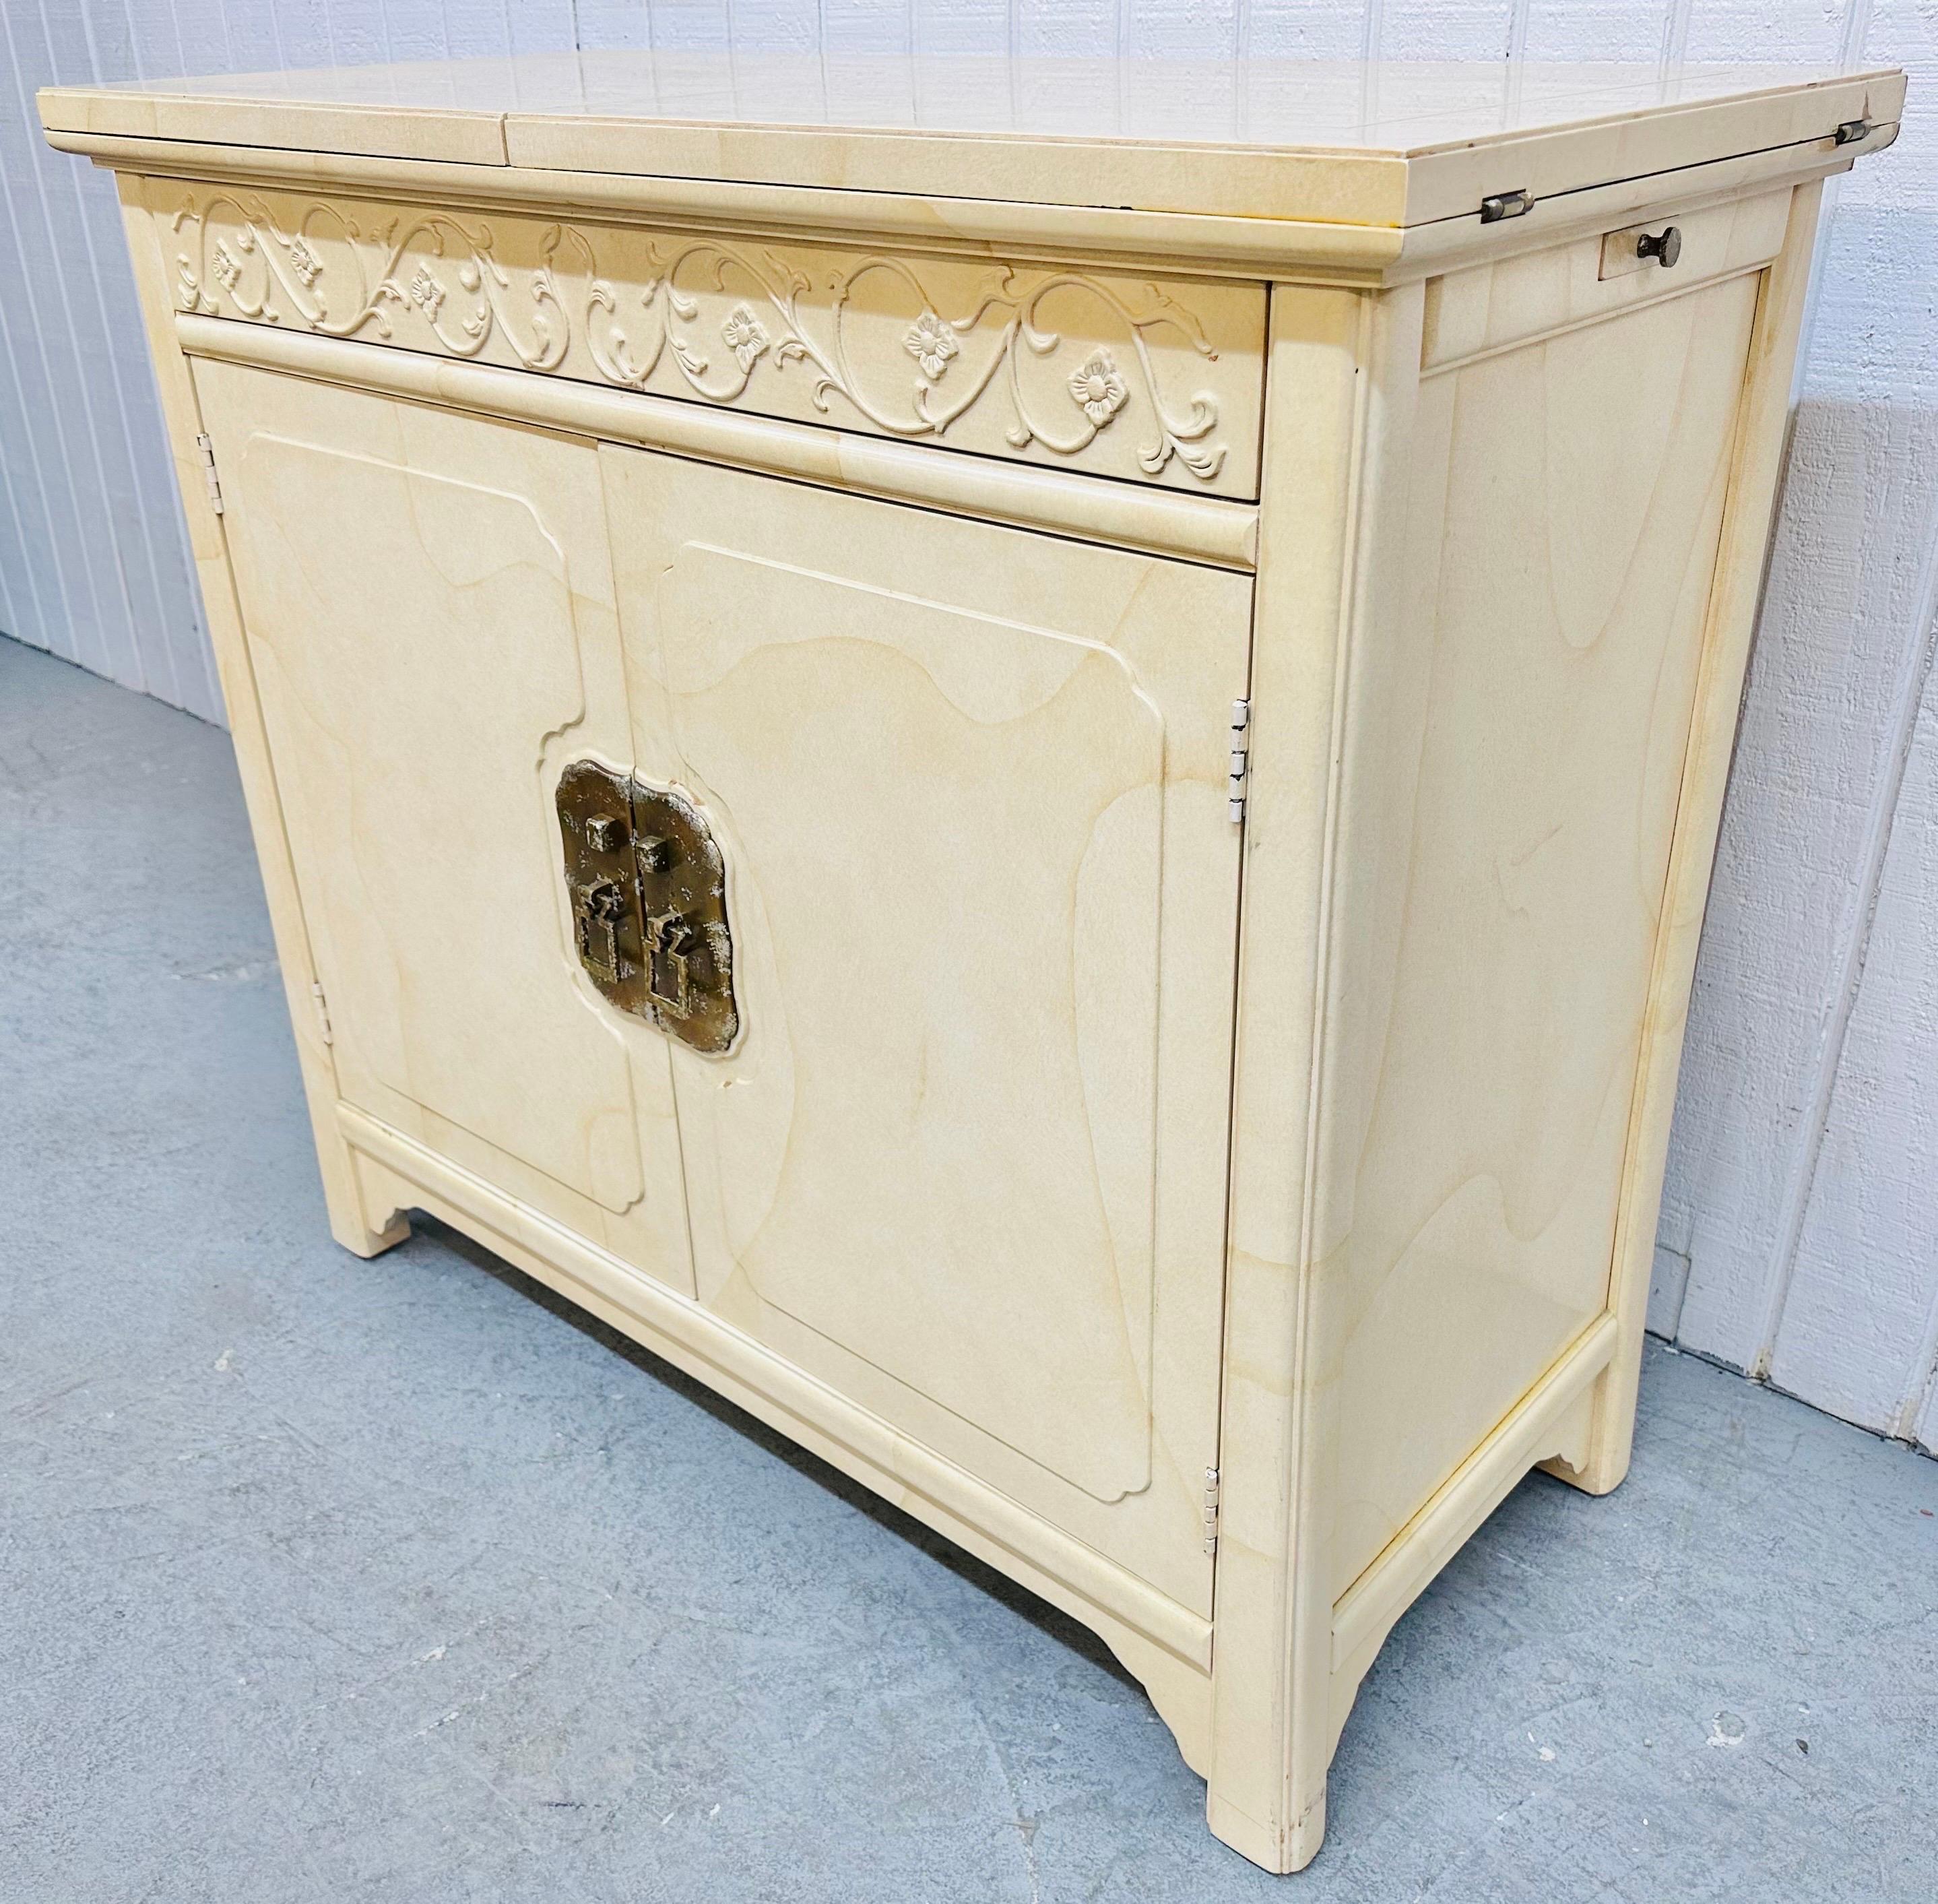 This listing is for a Vintage Henredon “Plan 2” Lacquered Bar Cabinet. Featuring a flip-top 76” L serving area, hidden push-to-open drawer, two doors that open up to storage space, original brass hardware, oriental inspired design, and a beautiful